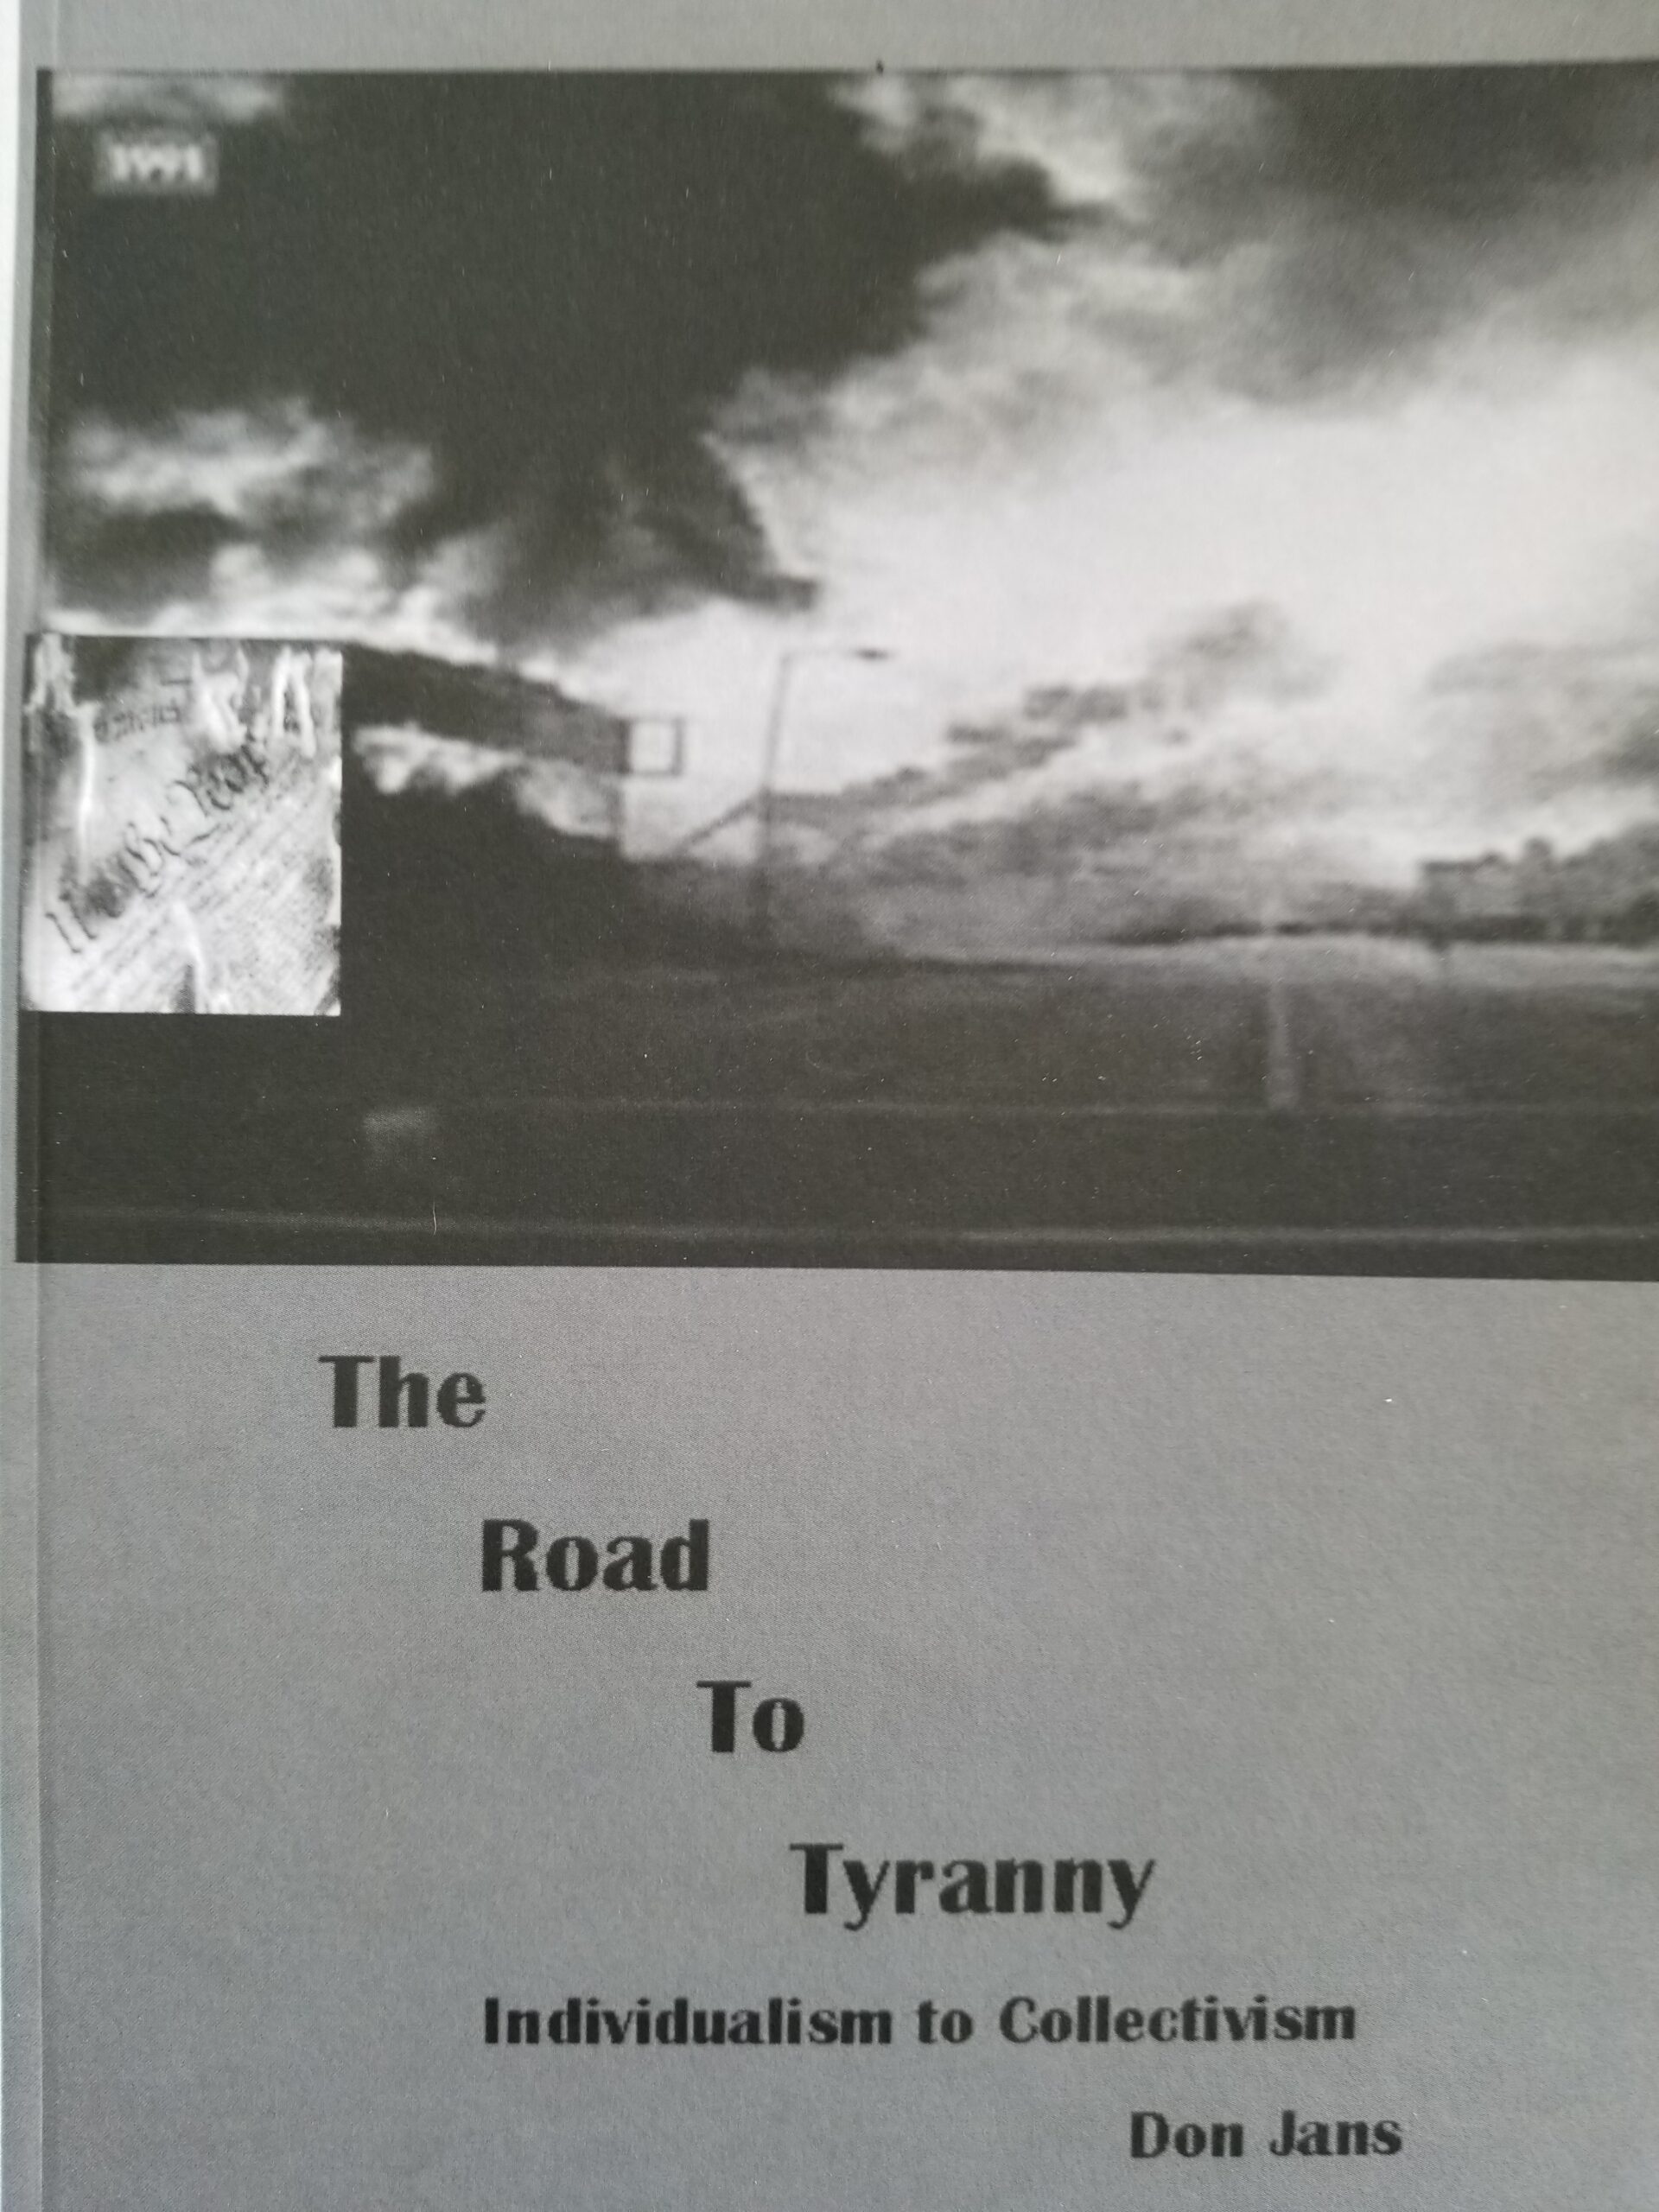 The Road to Tyranny by Don Jans